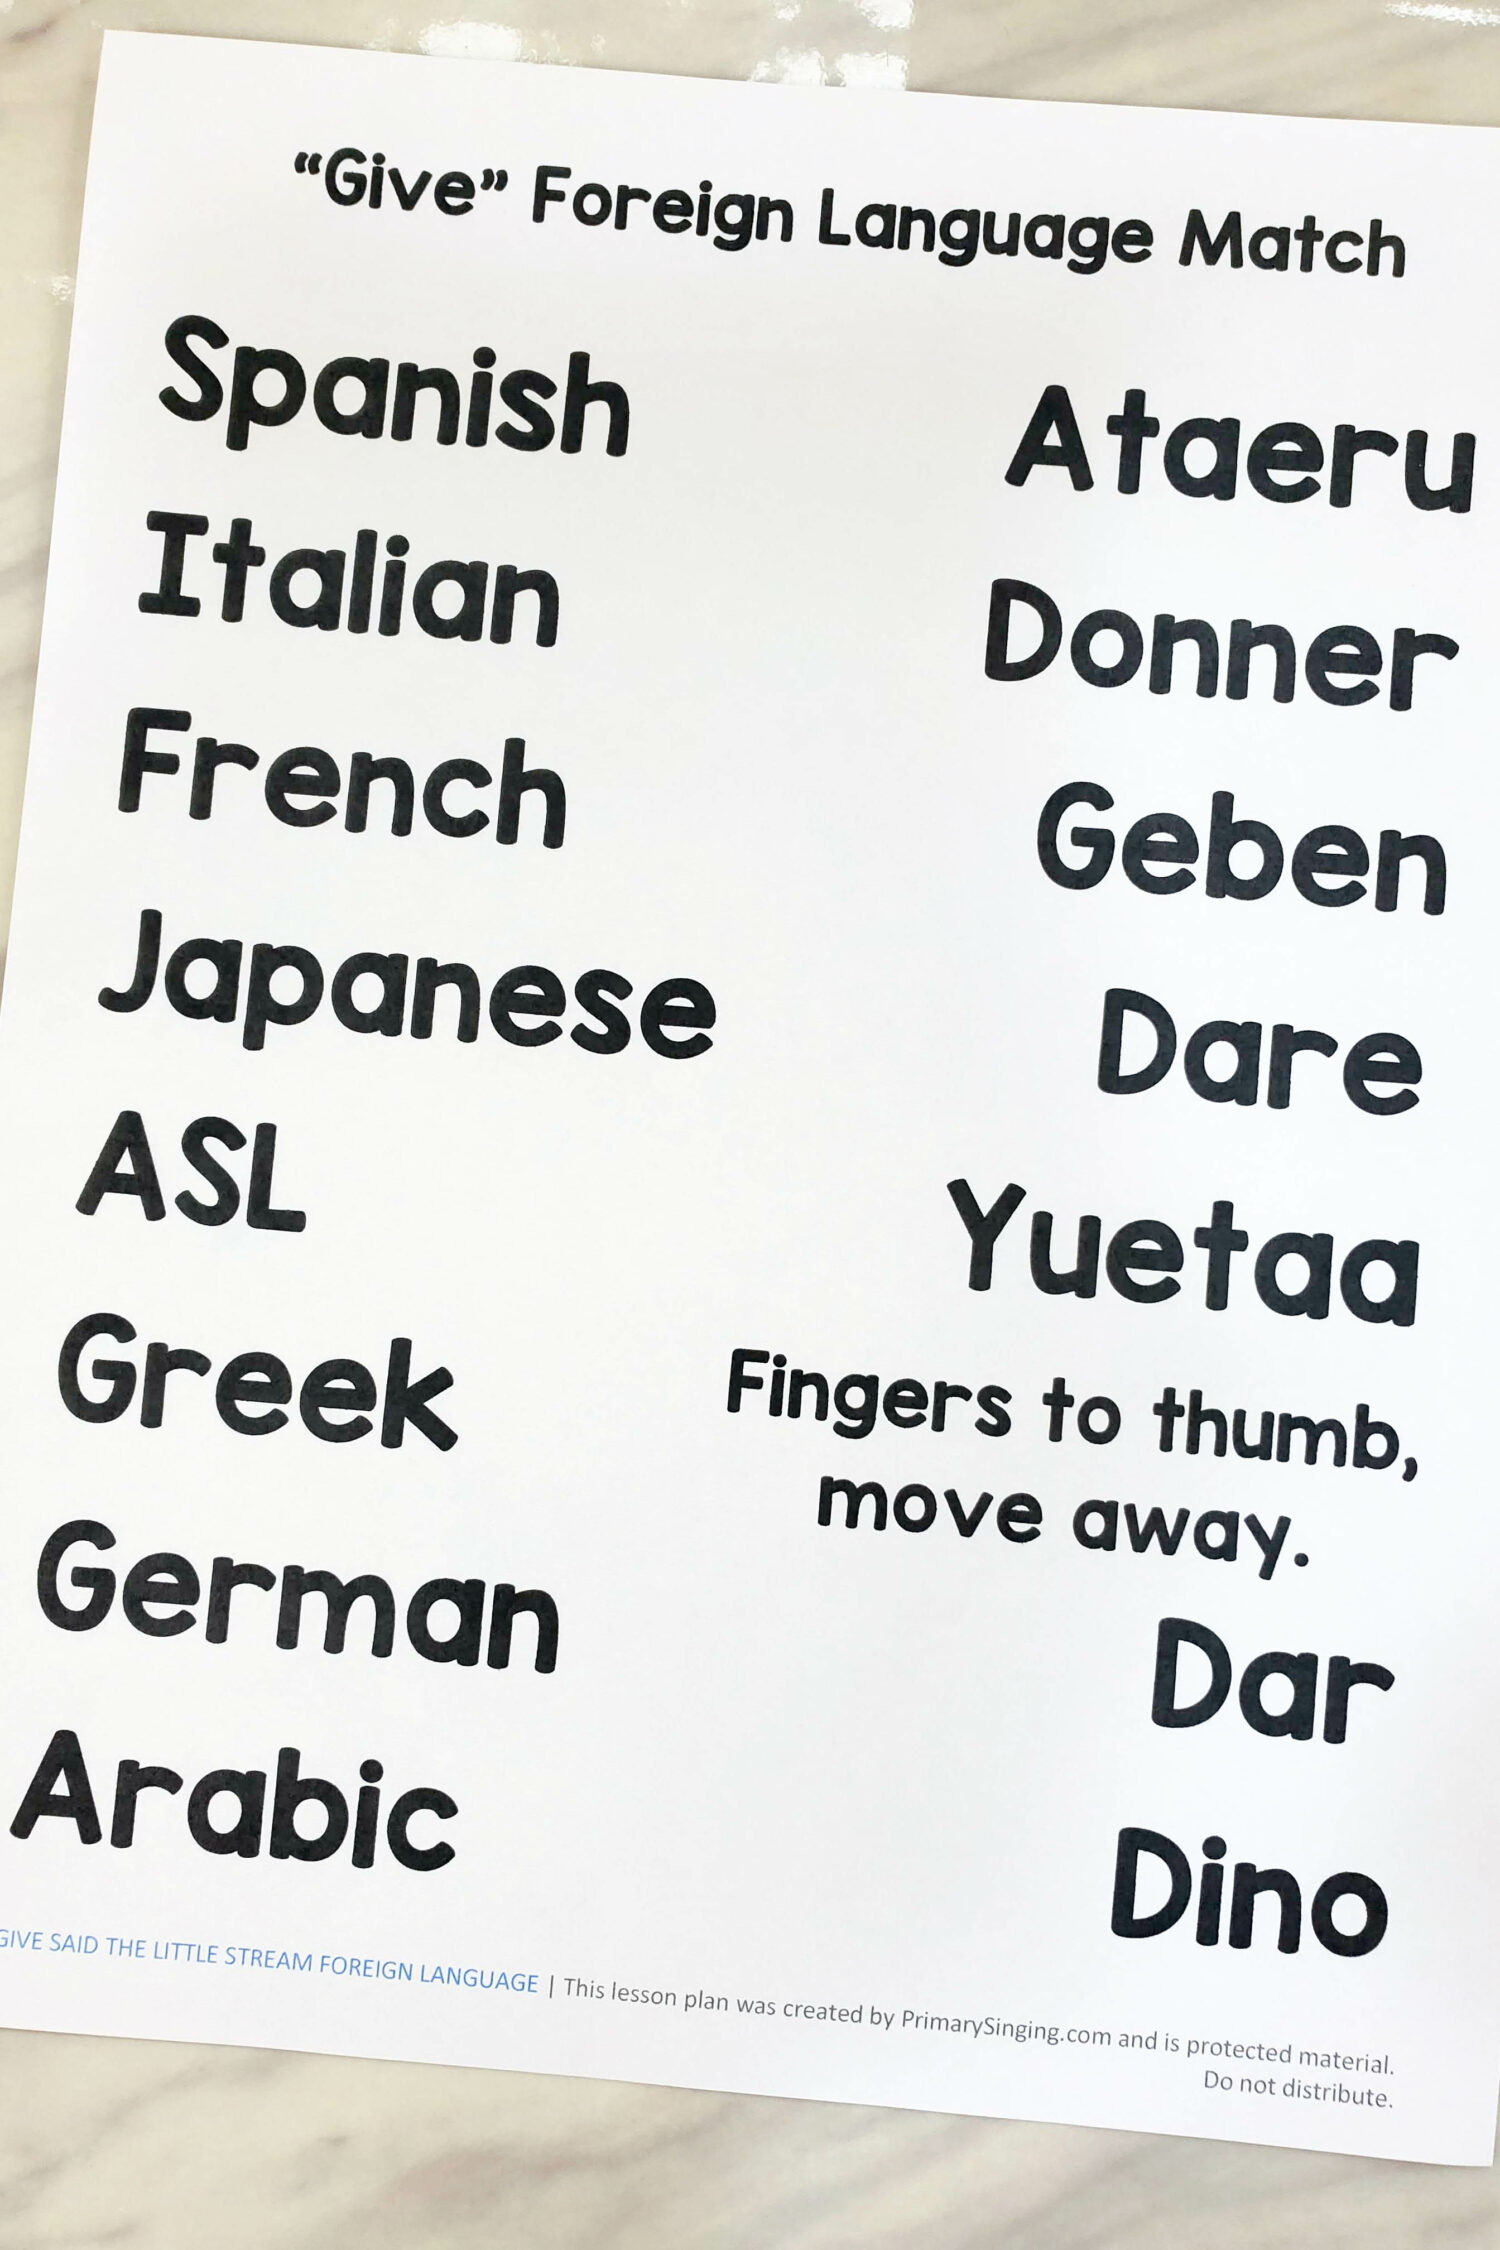 Give Said the Little Stream Foreign Language matching game